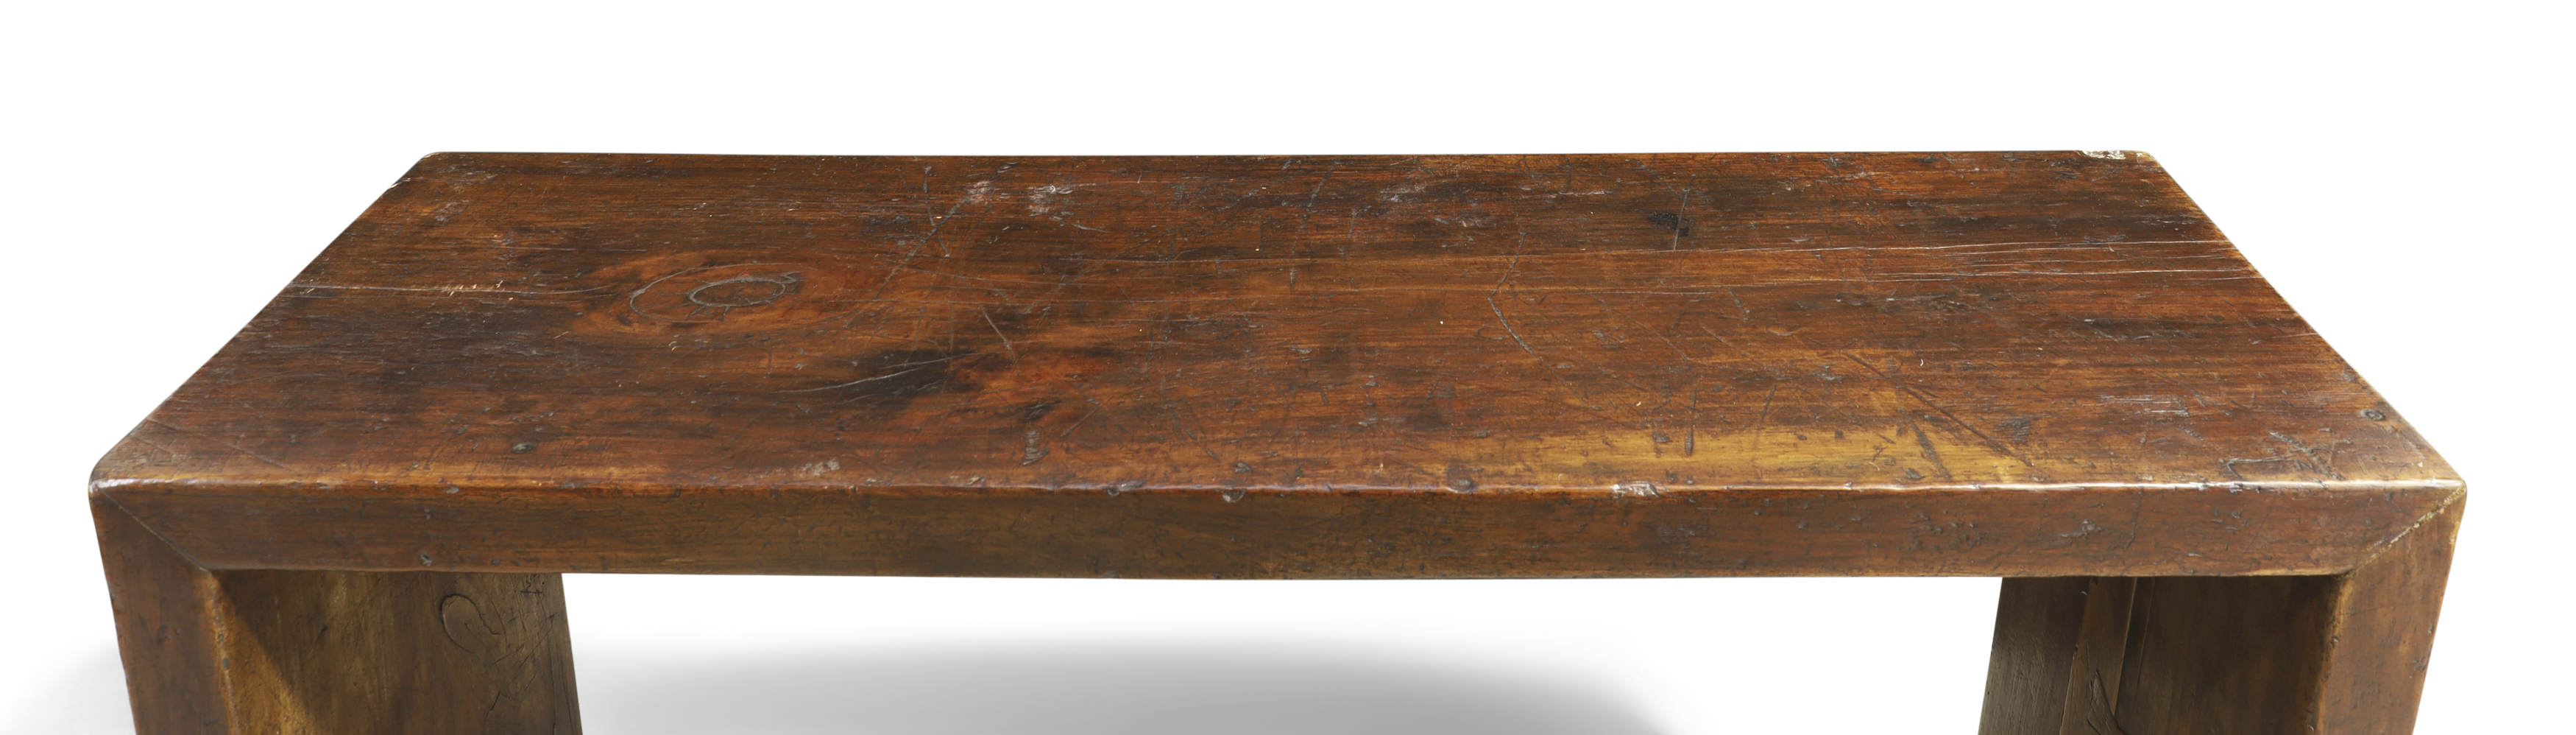 A Chinese hardwood painting table Early 20th century Of simple rectangular construction with st... - Image 2 of 2